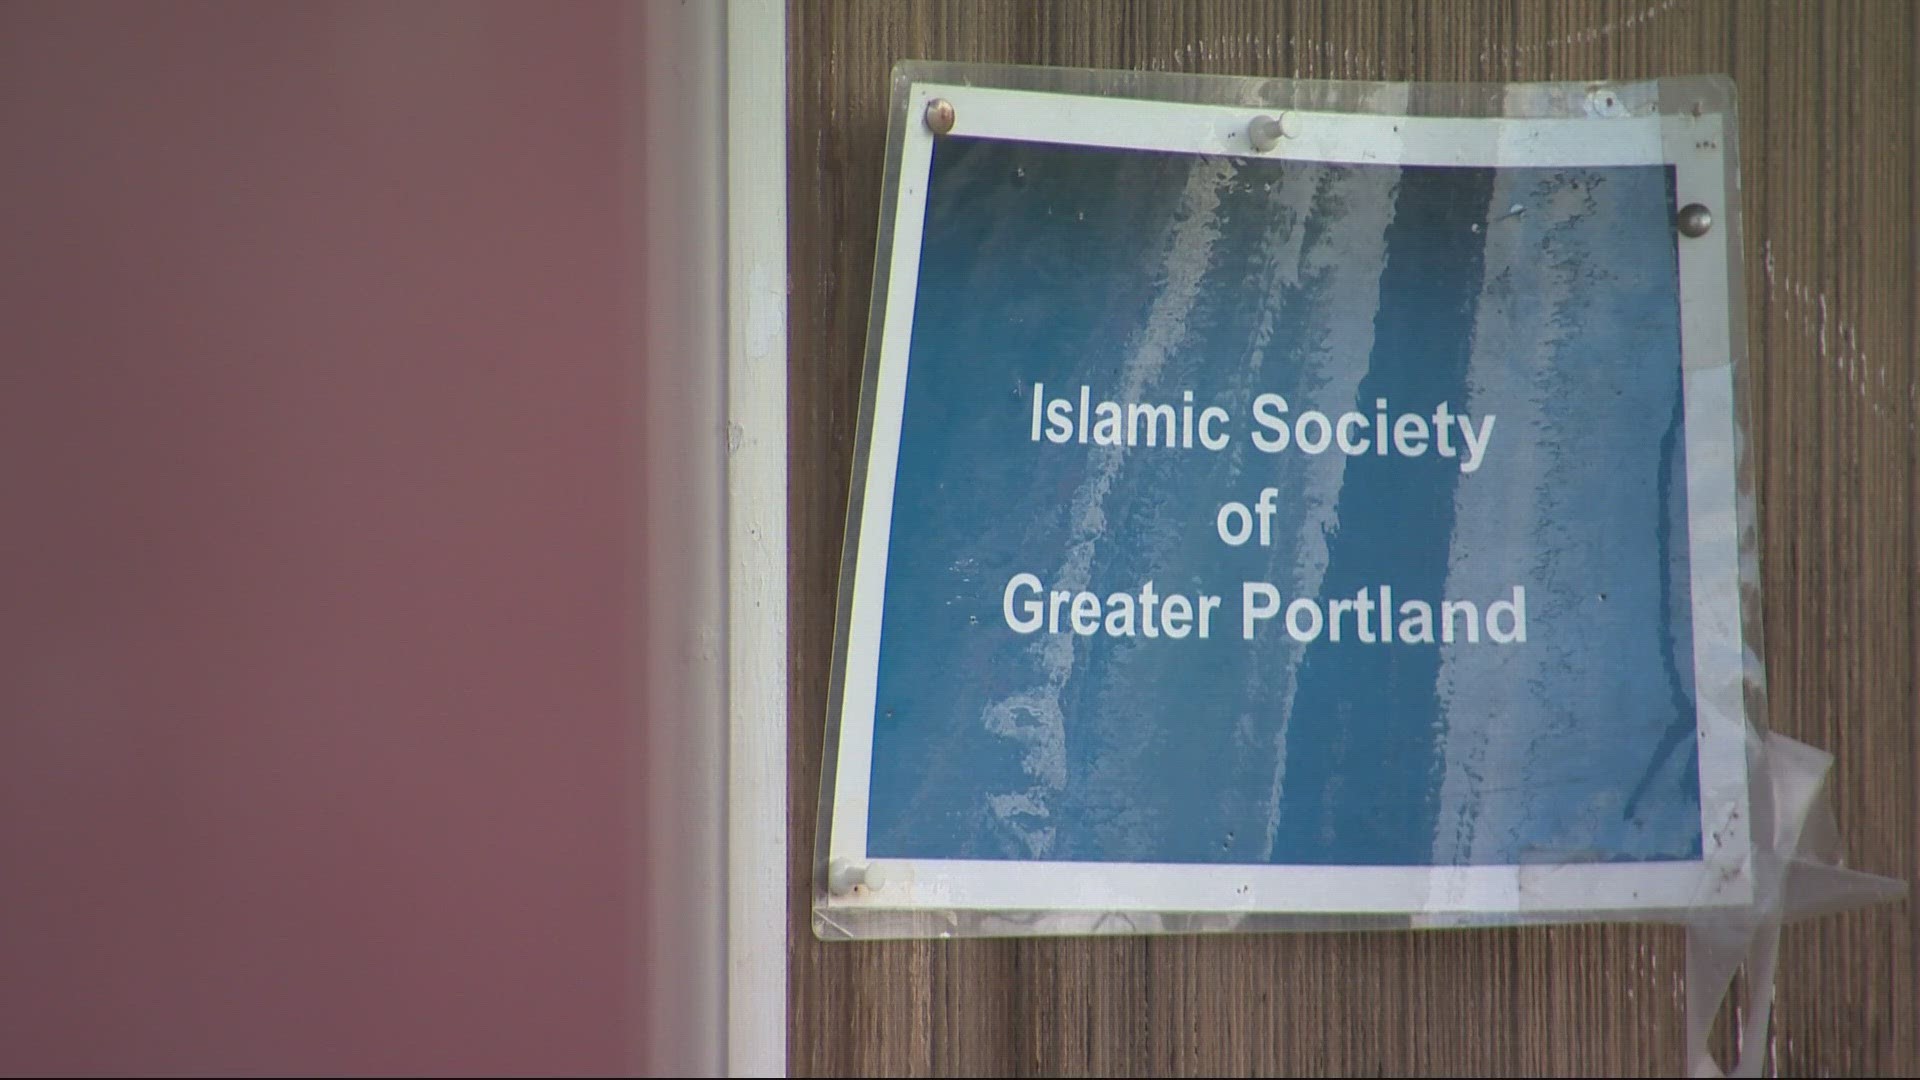 The Islamic Society of Greater Portland said it reported the threat to law enforcement. The FBI warns that threats are on the rise.